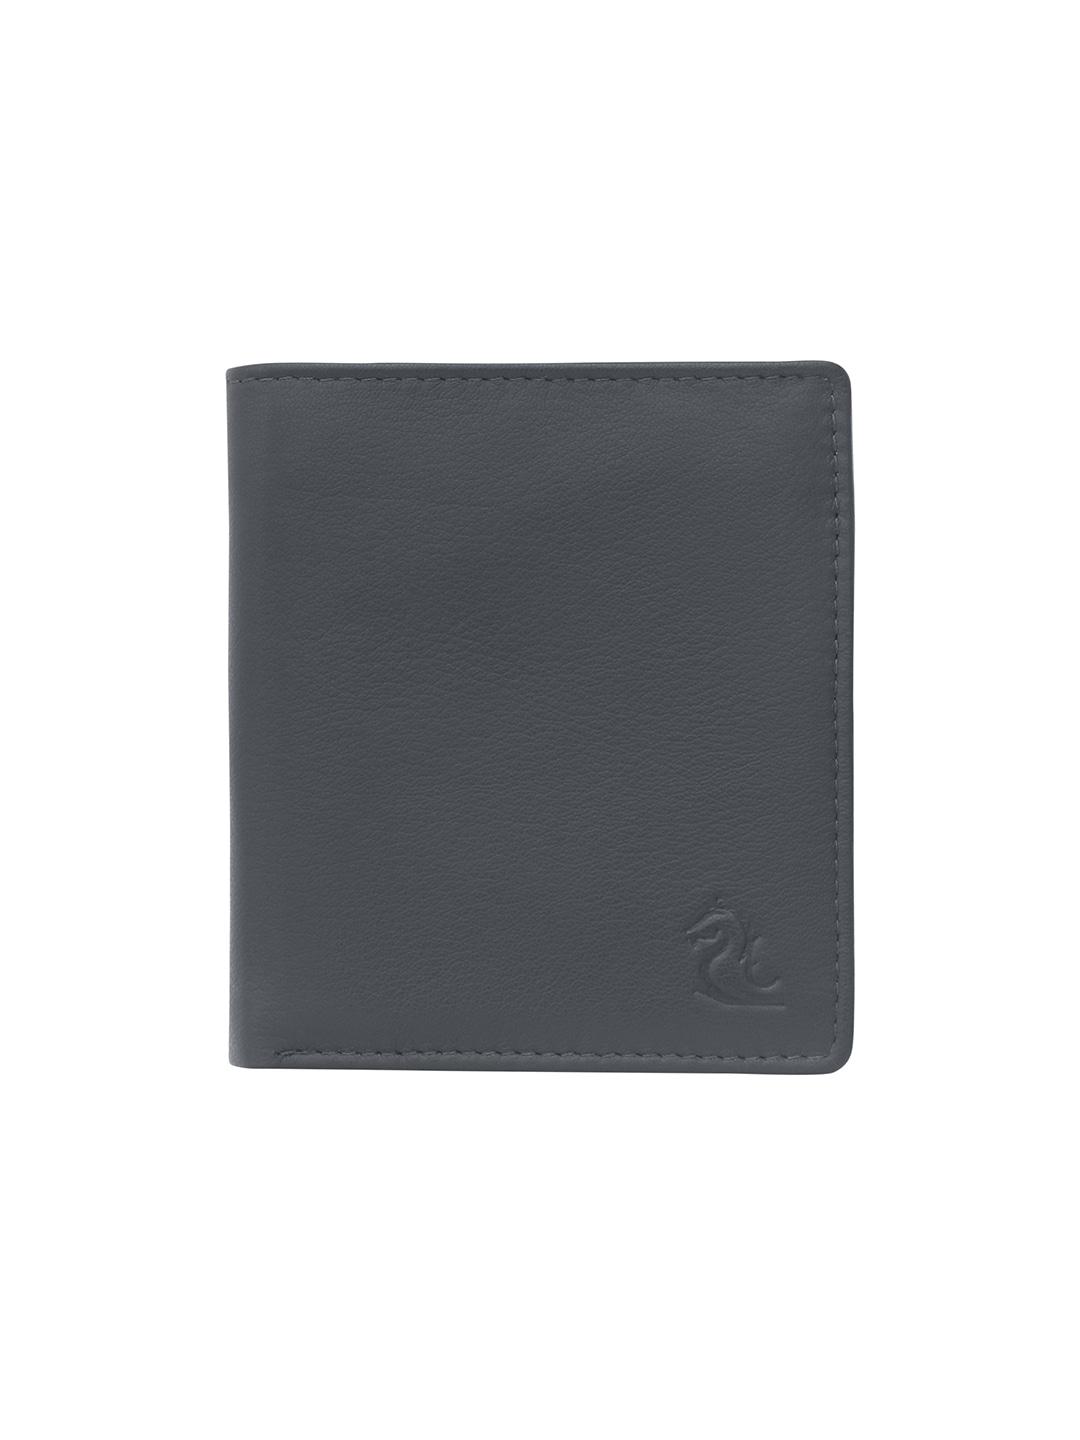 black-leather-two-fold-wallet